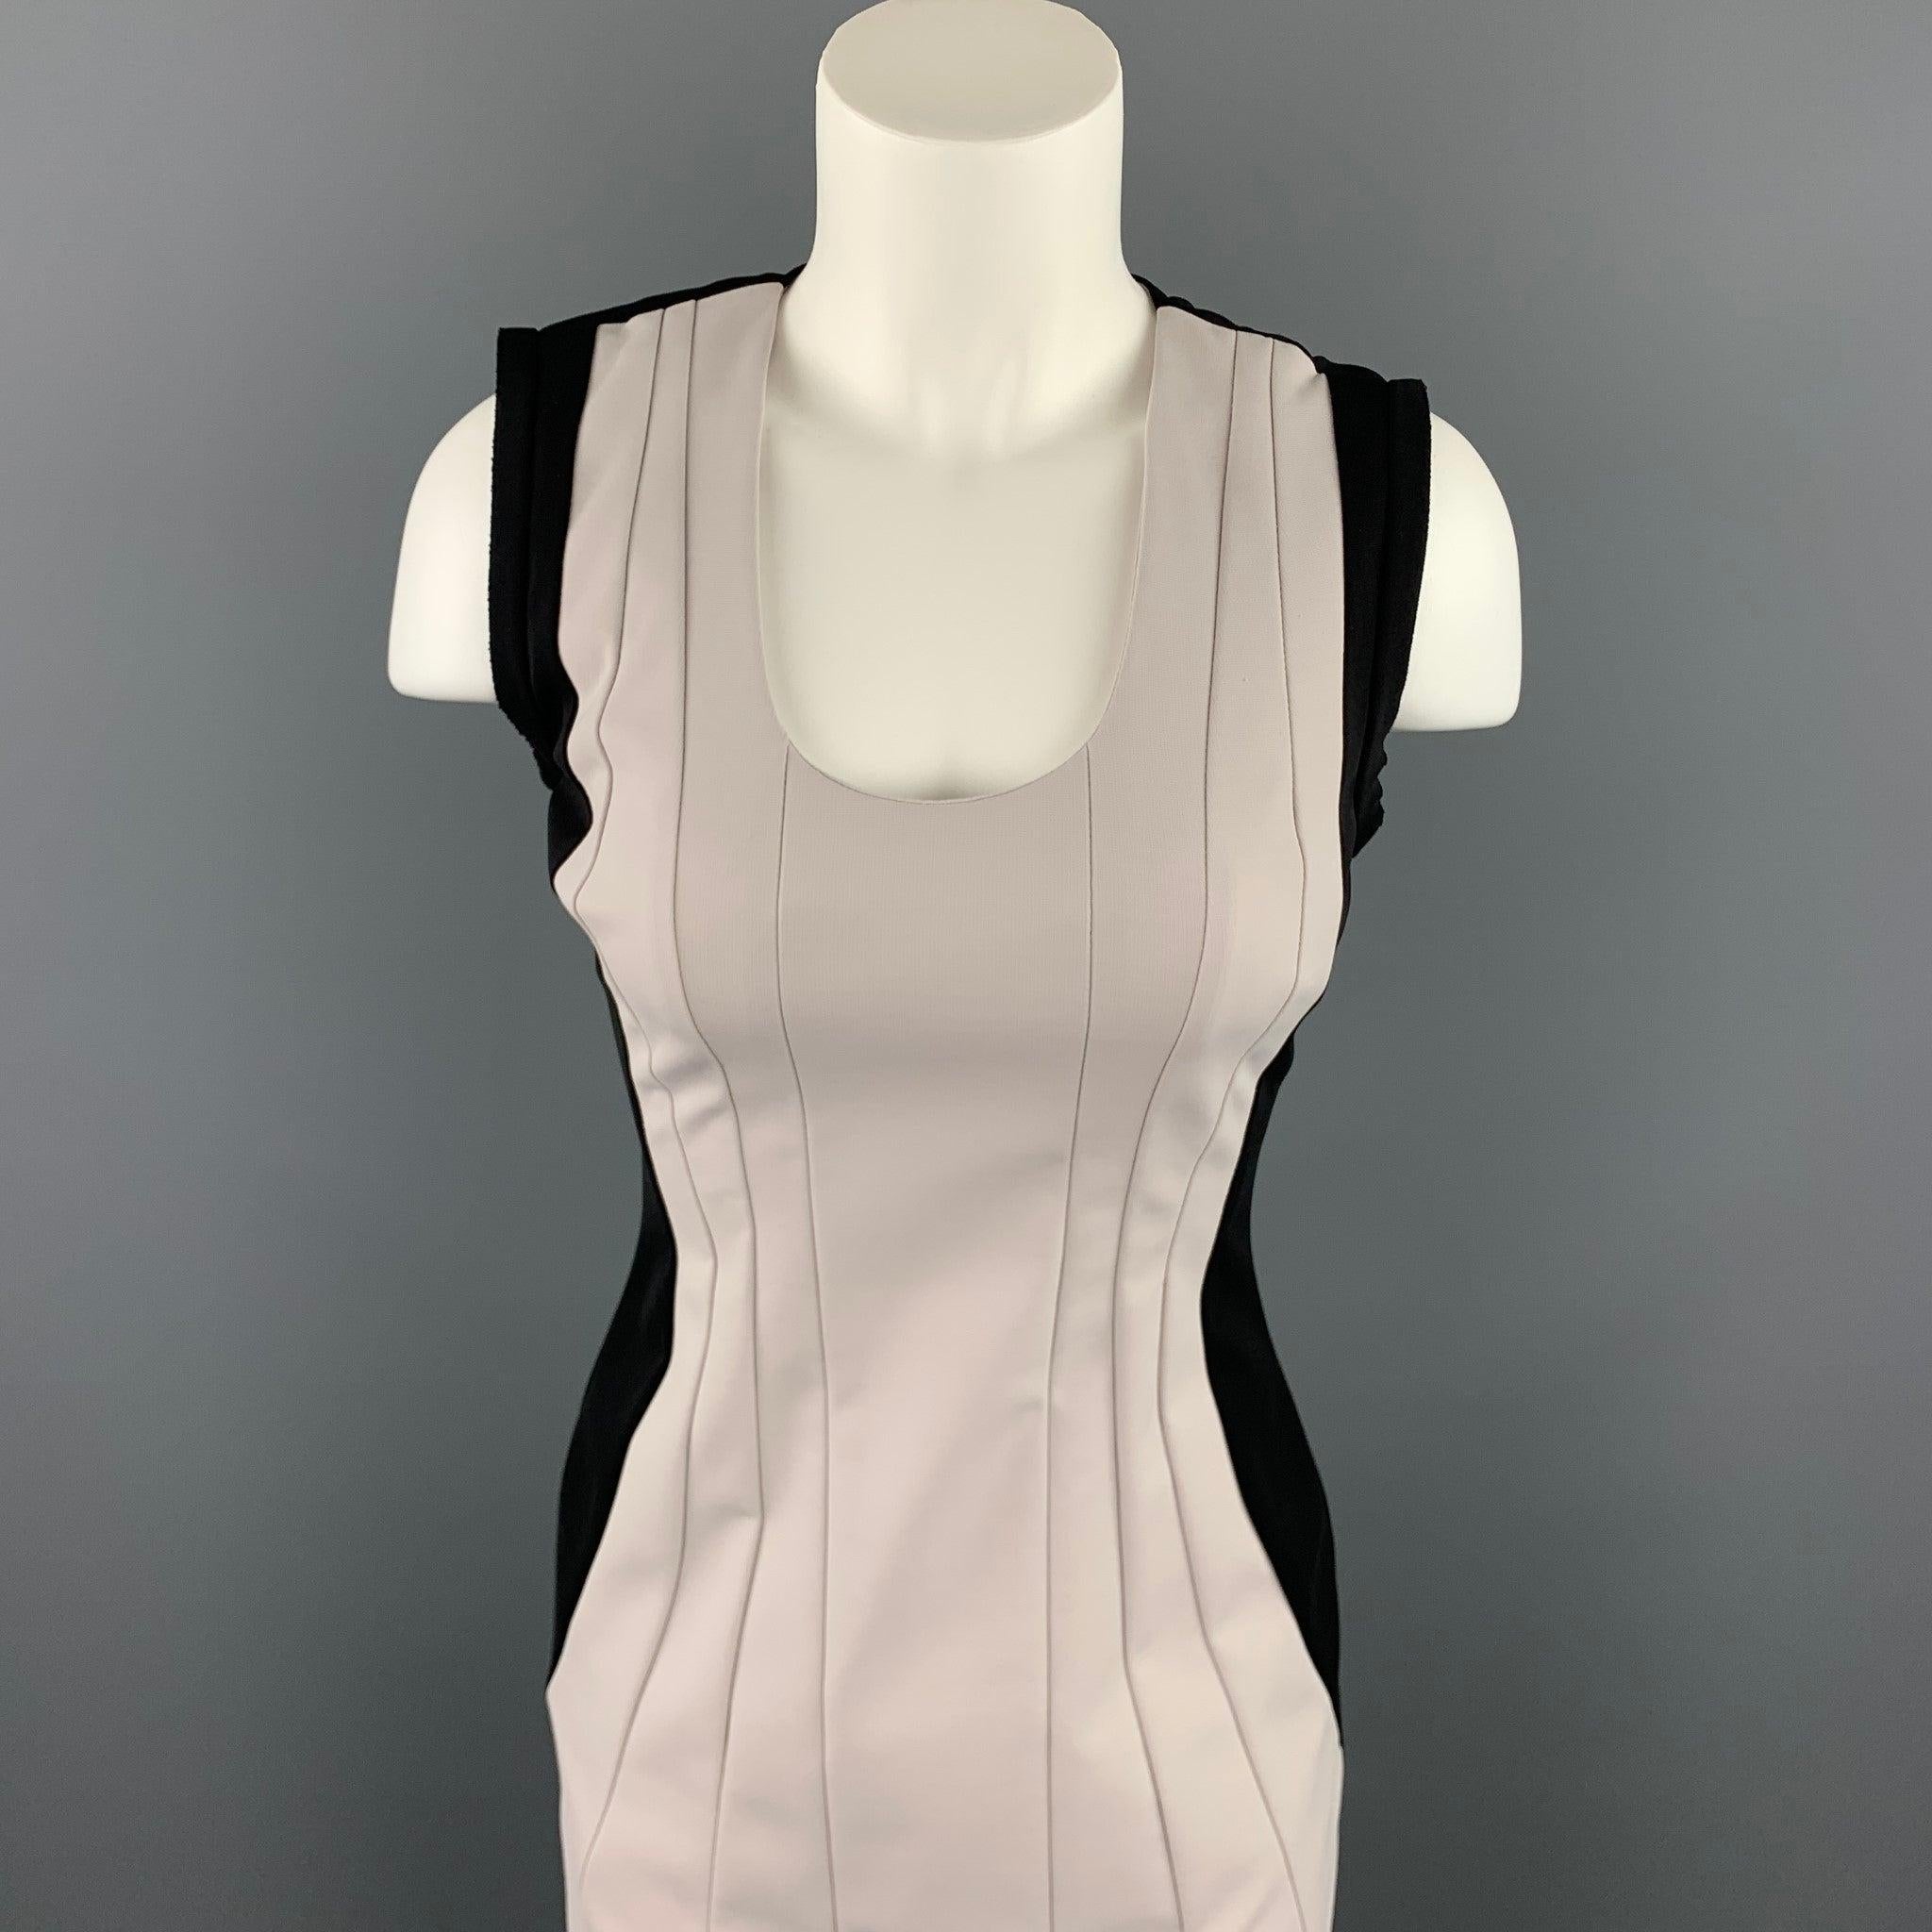 DIANE VON FURSTENBERG dress comes in a cream & black pleated polyamide featuring a sheath style, scoop neck, and a back zip up closure.
Good
Pre-Owned Condition. 

Marked:   2 

Measurements: 
 
Shoulder: 14.5 inches 
Bust: 28 inches 
Waist: 25